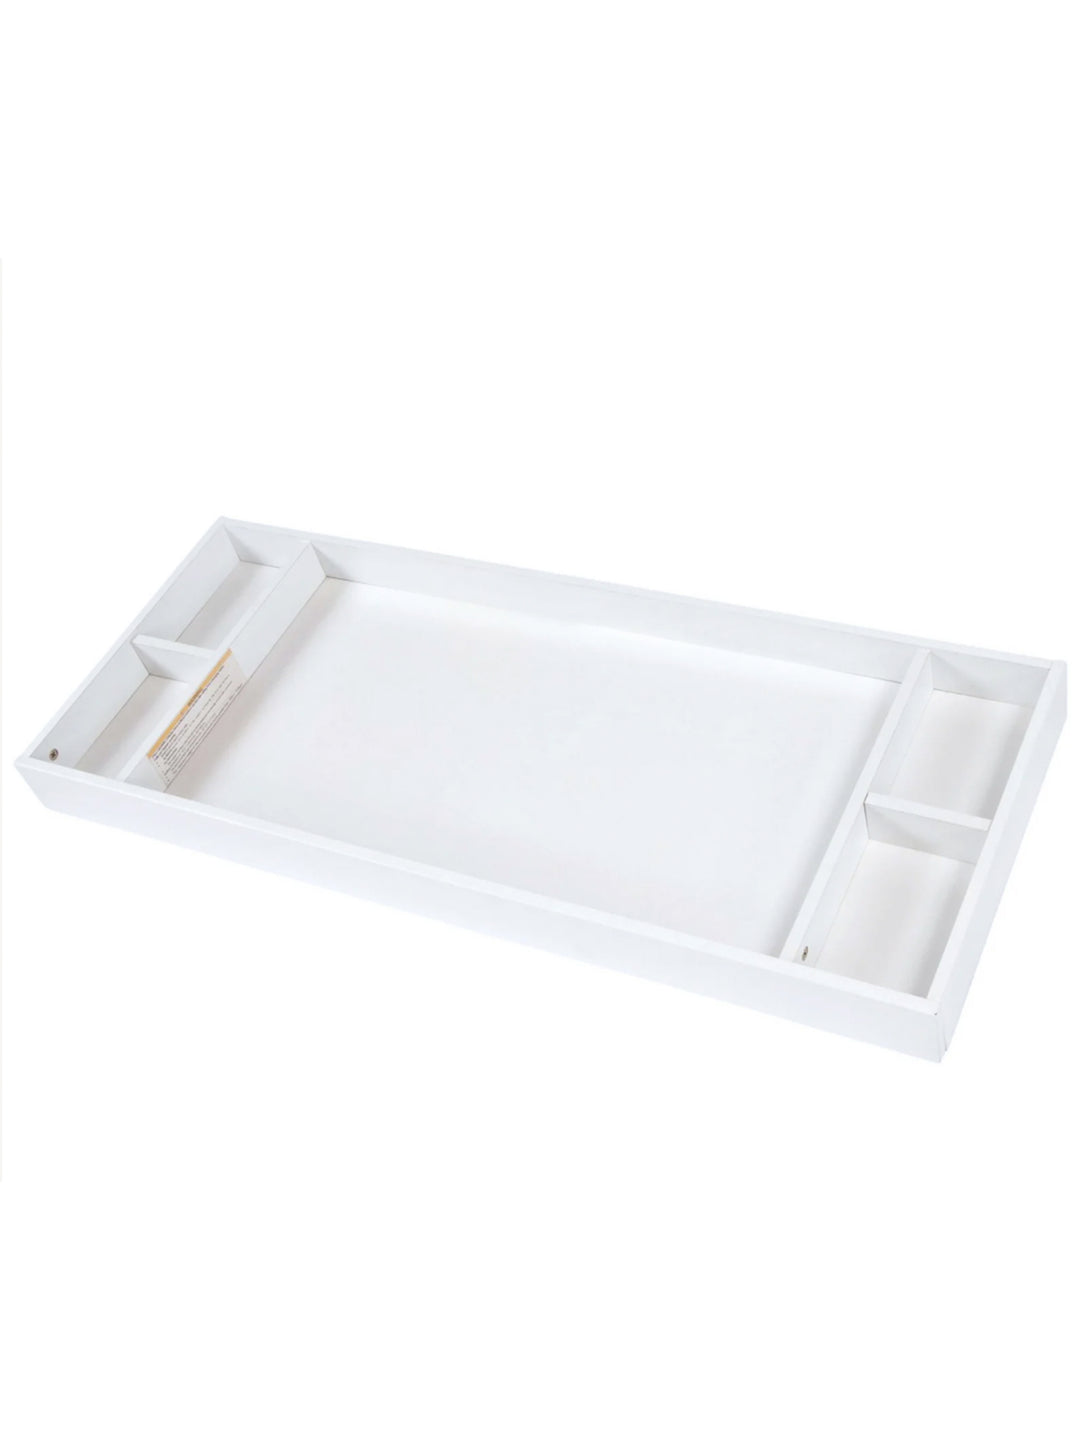 Dadada Changing Tray for Soho and Chicago Dressers